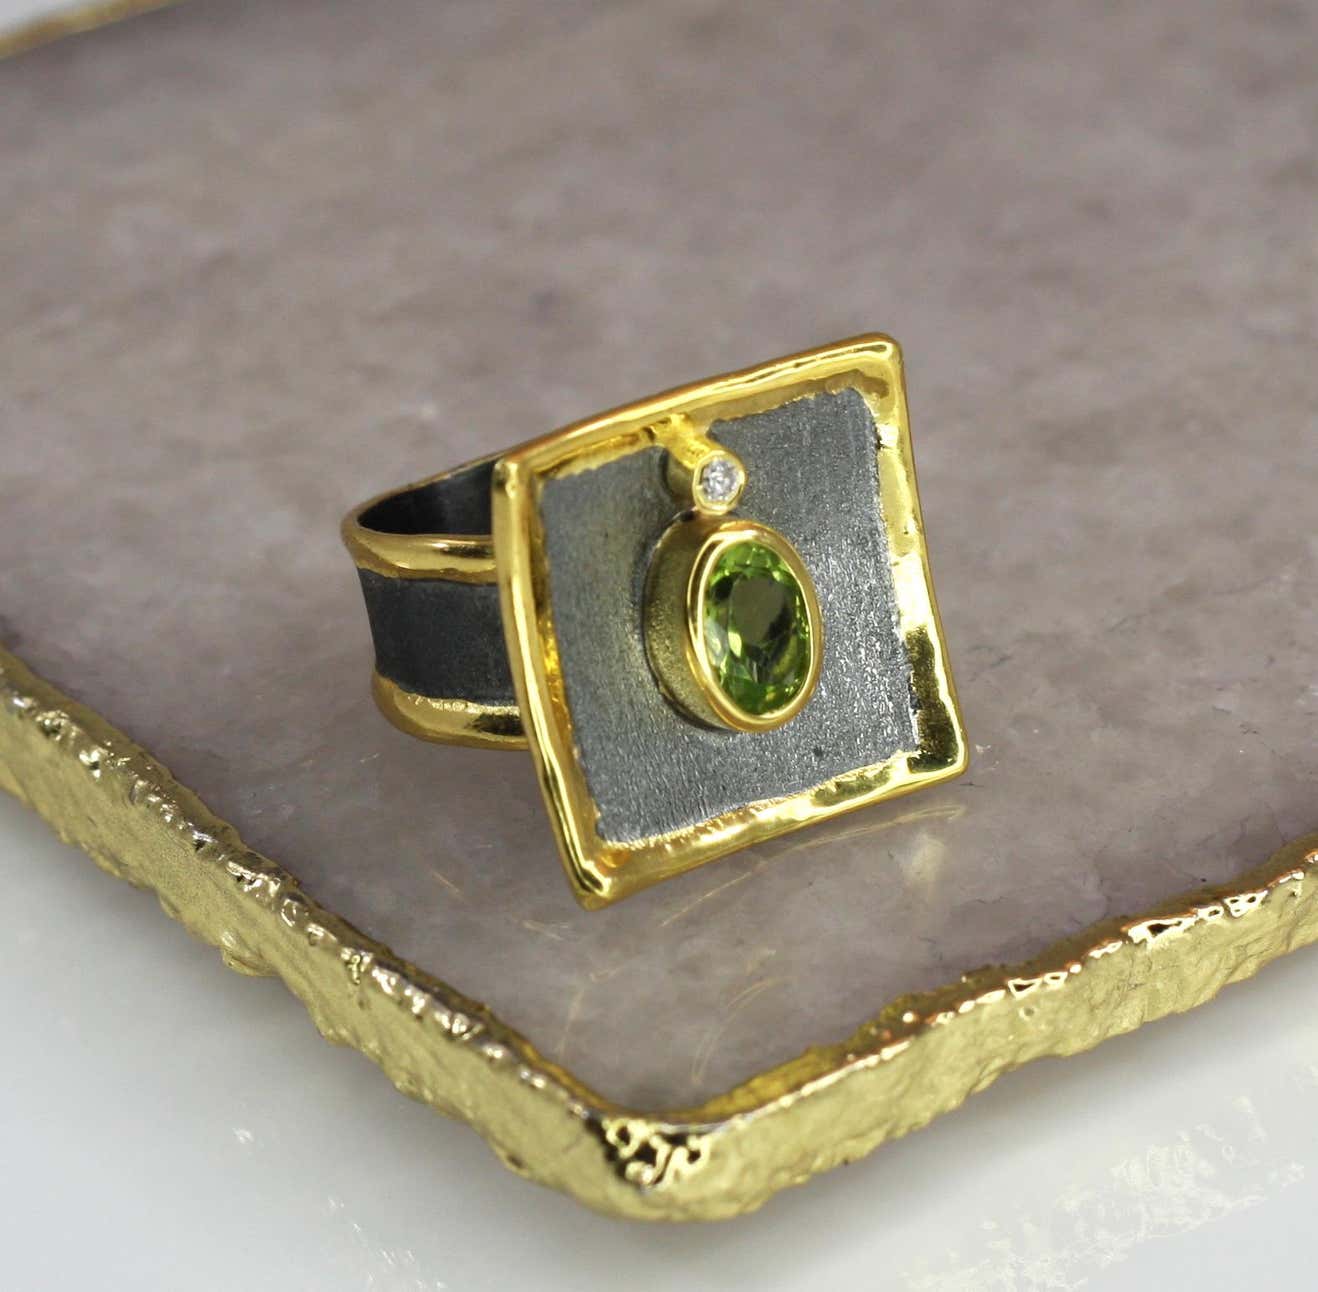 Eclyps 1.35 Peridot Fine Silver Square Ring with Ruthenium and Gold